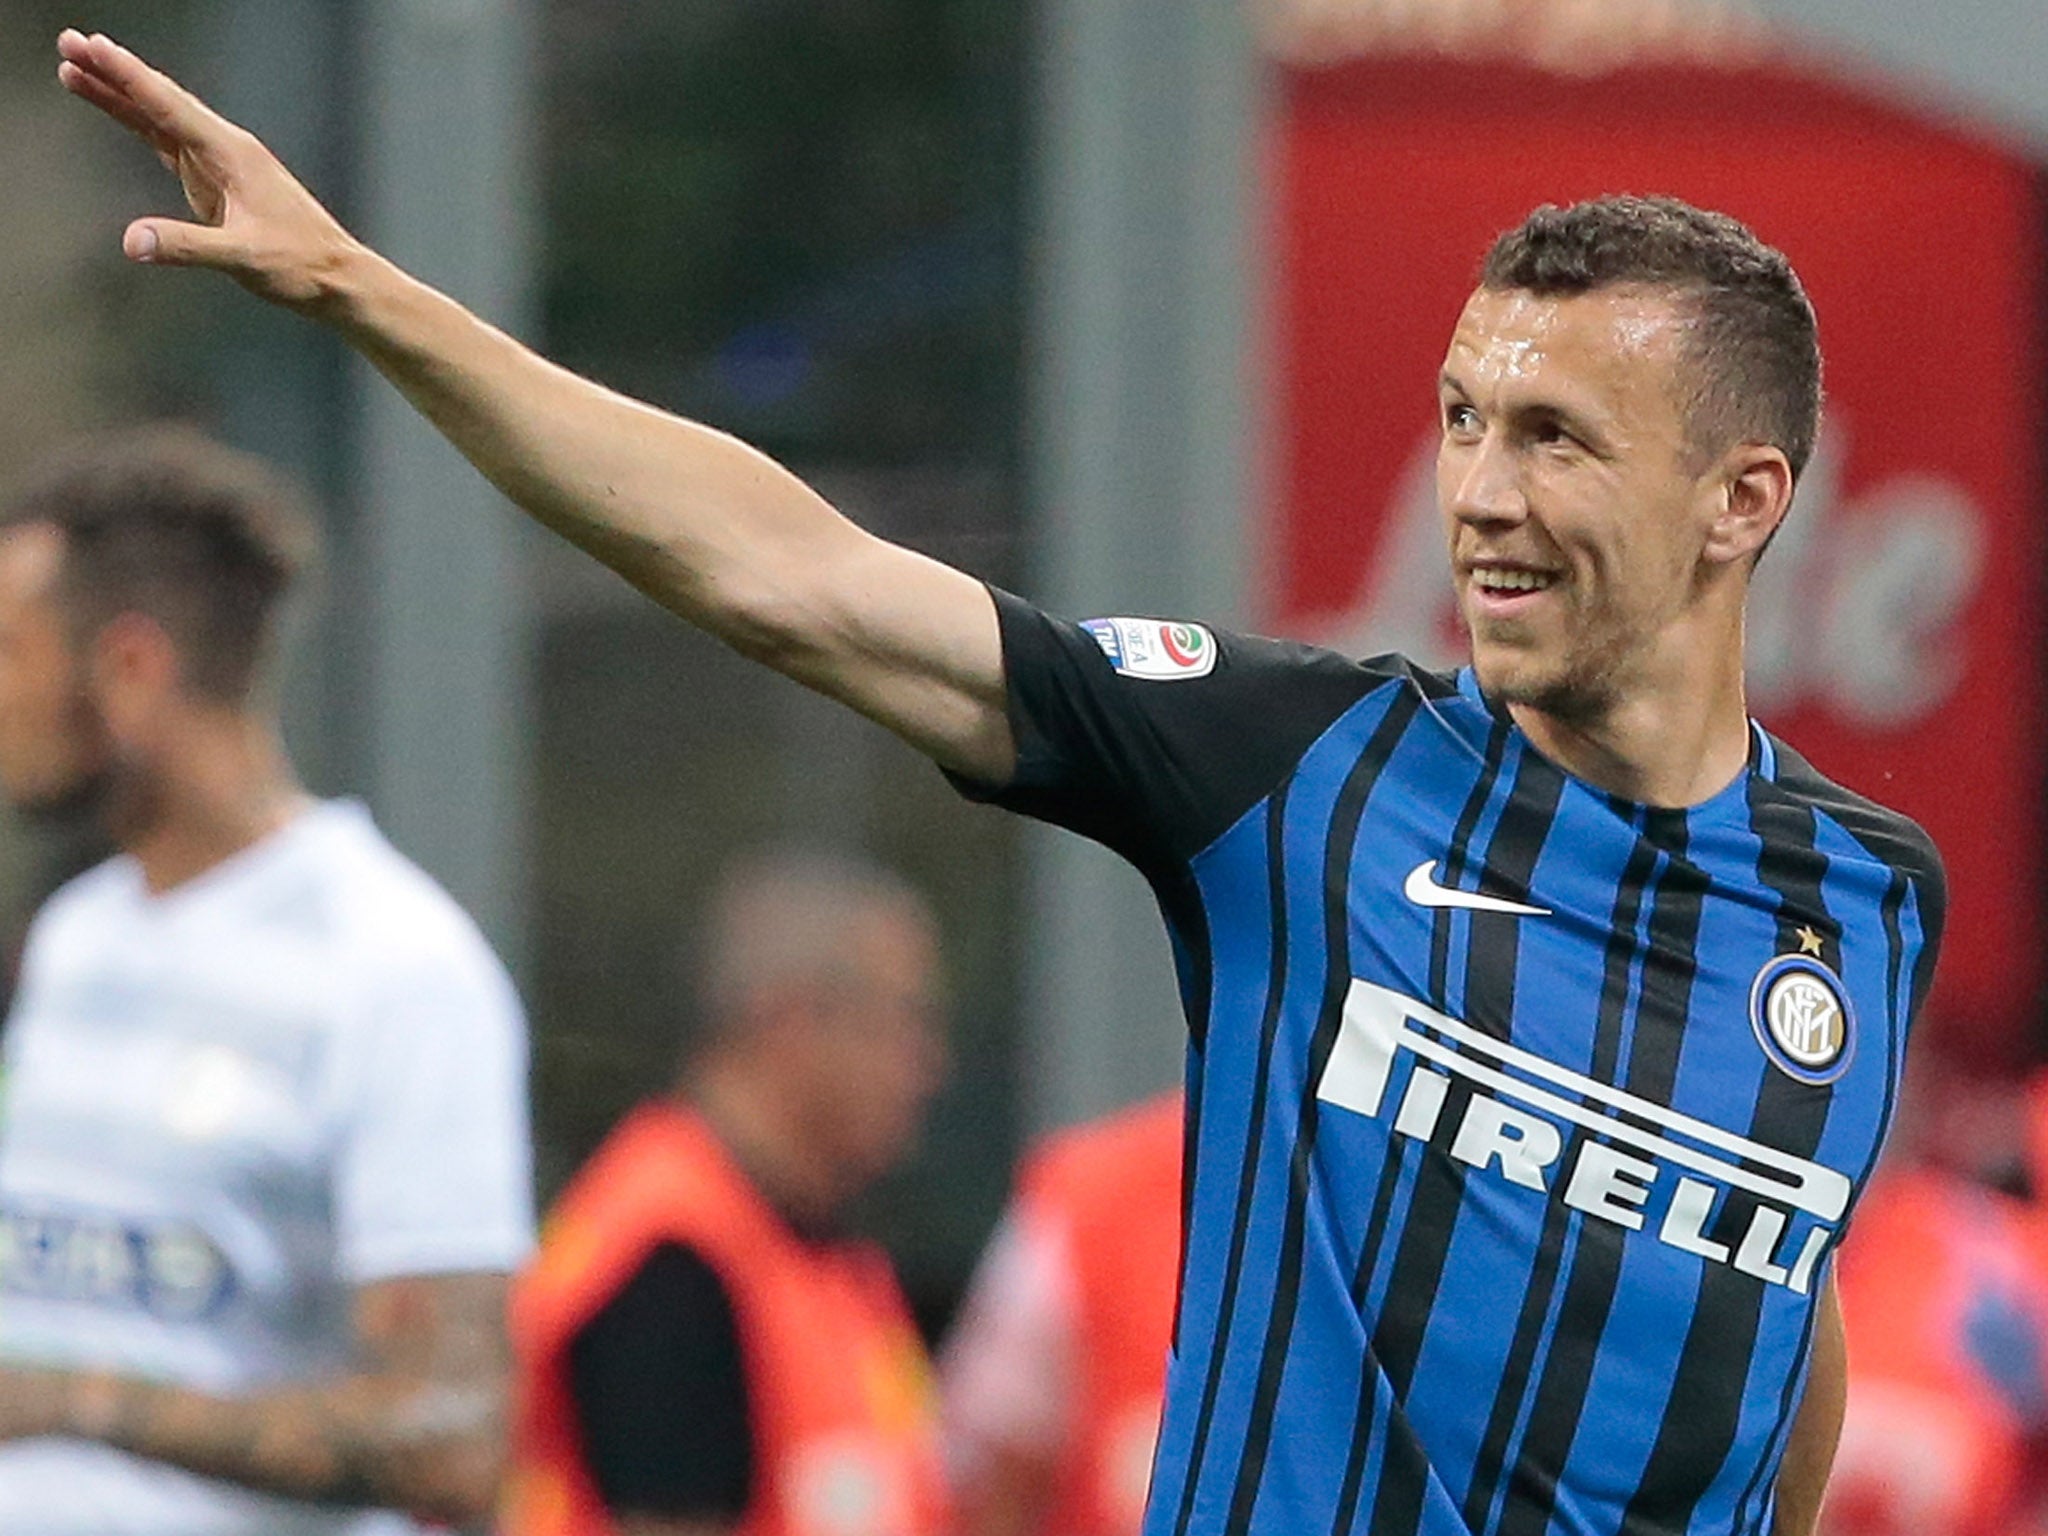 Manchester United make Ivan Perisic breakthrough with club confident £48m deal will be completed imminently